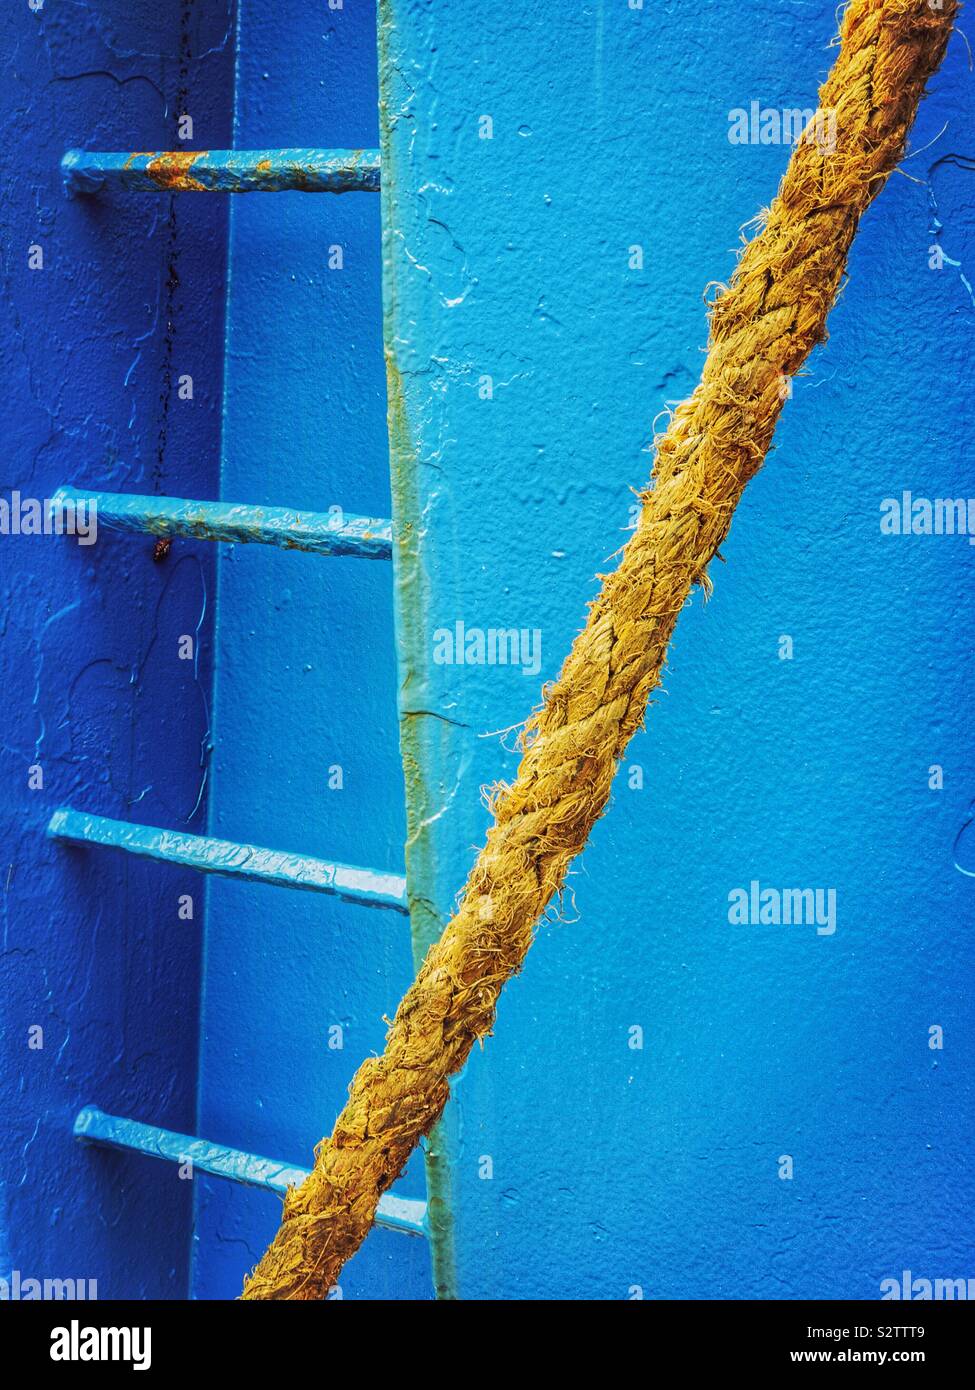 Detail of side of a blue ship with ladder and mooring rope. Stock Photo